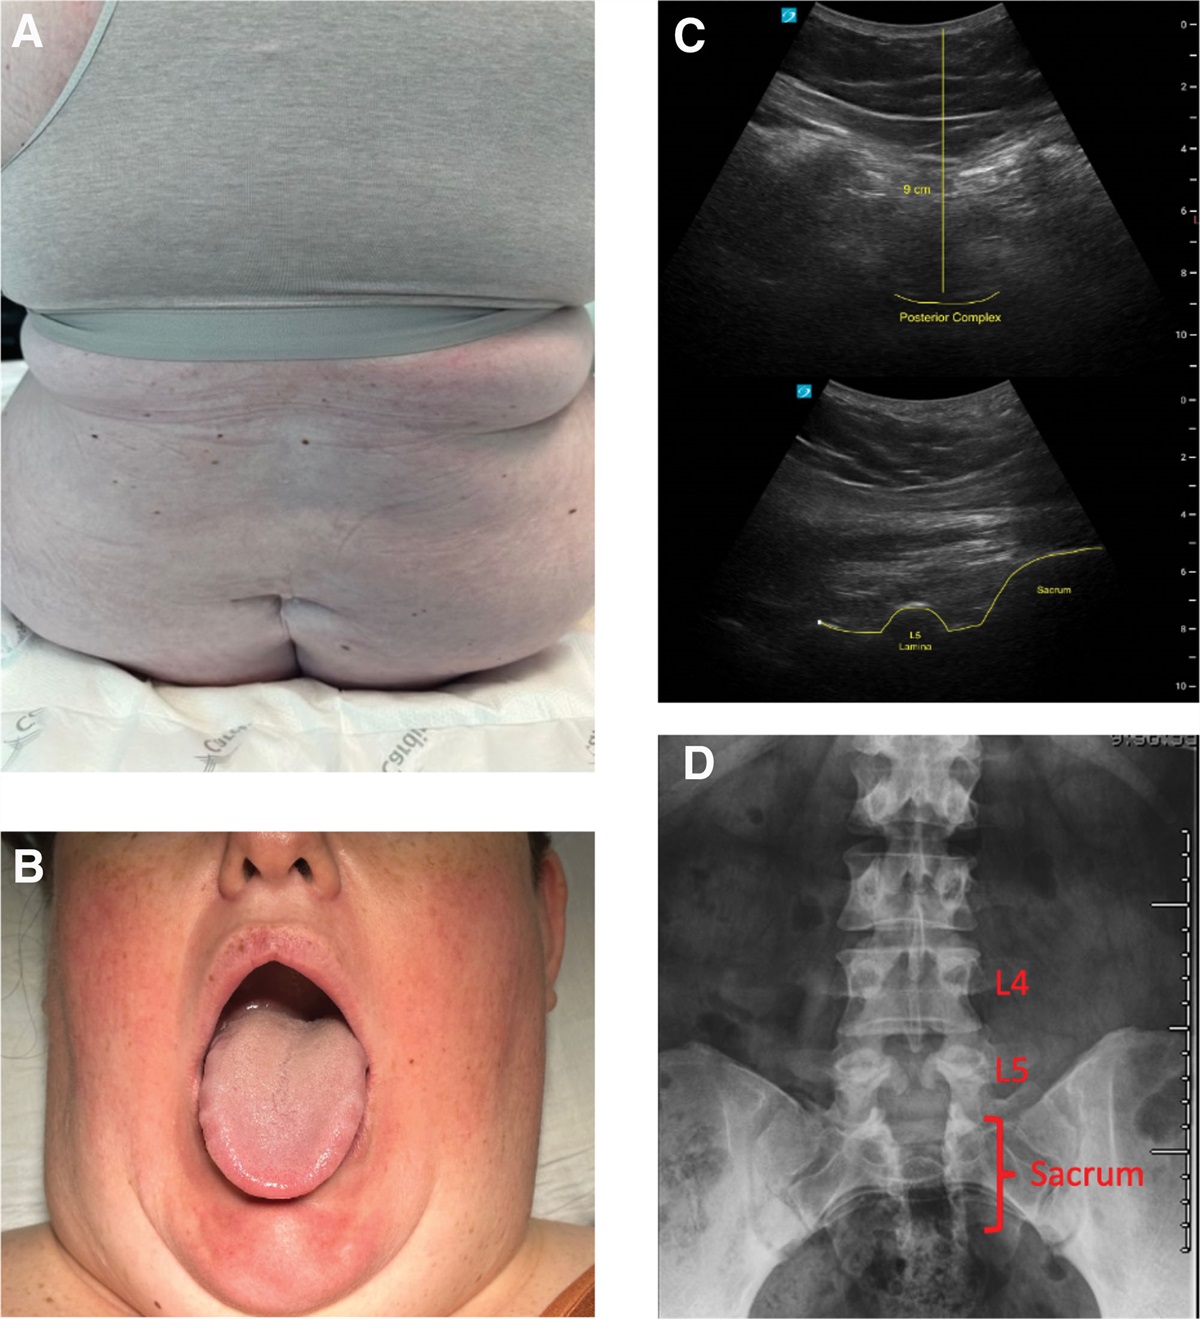 A Case Report of Fluoroscopically Guided Epidural Catheter Placement in a Parturient with History of Tethered Cord, Super-Morbid Obesity, and Risk for Difficult Airway